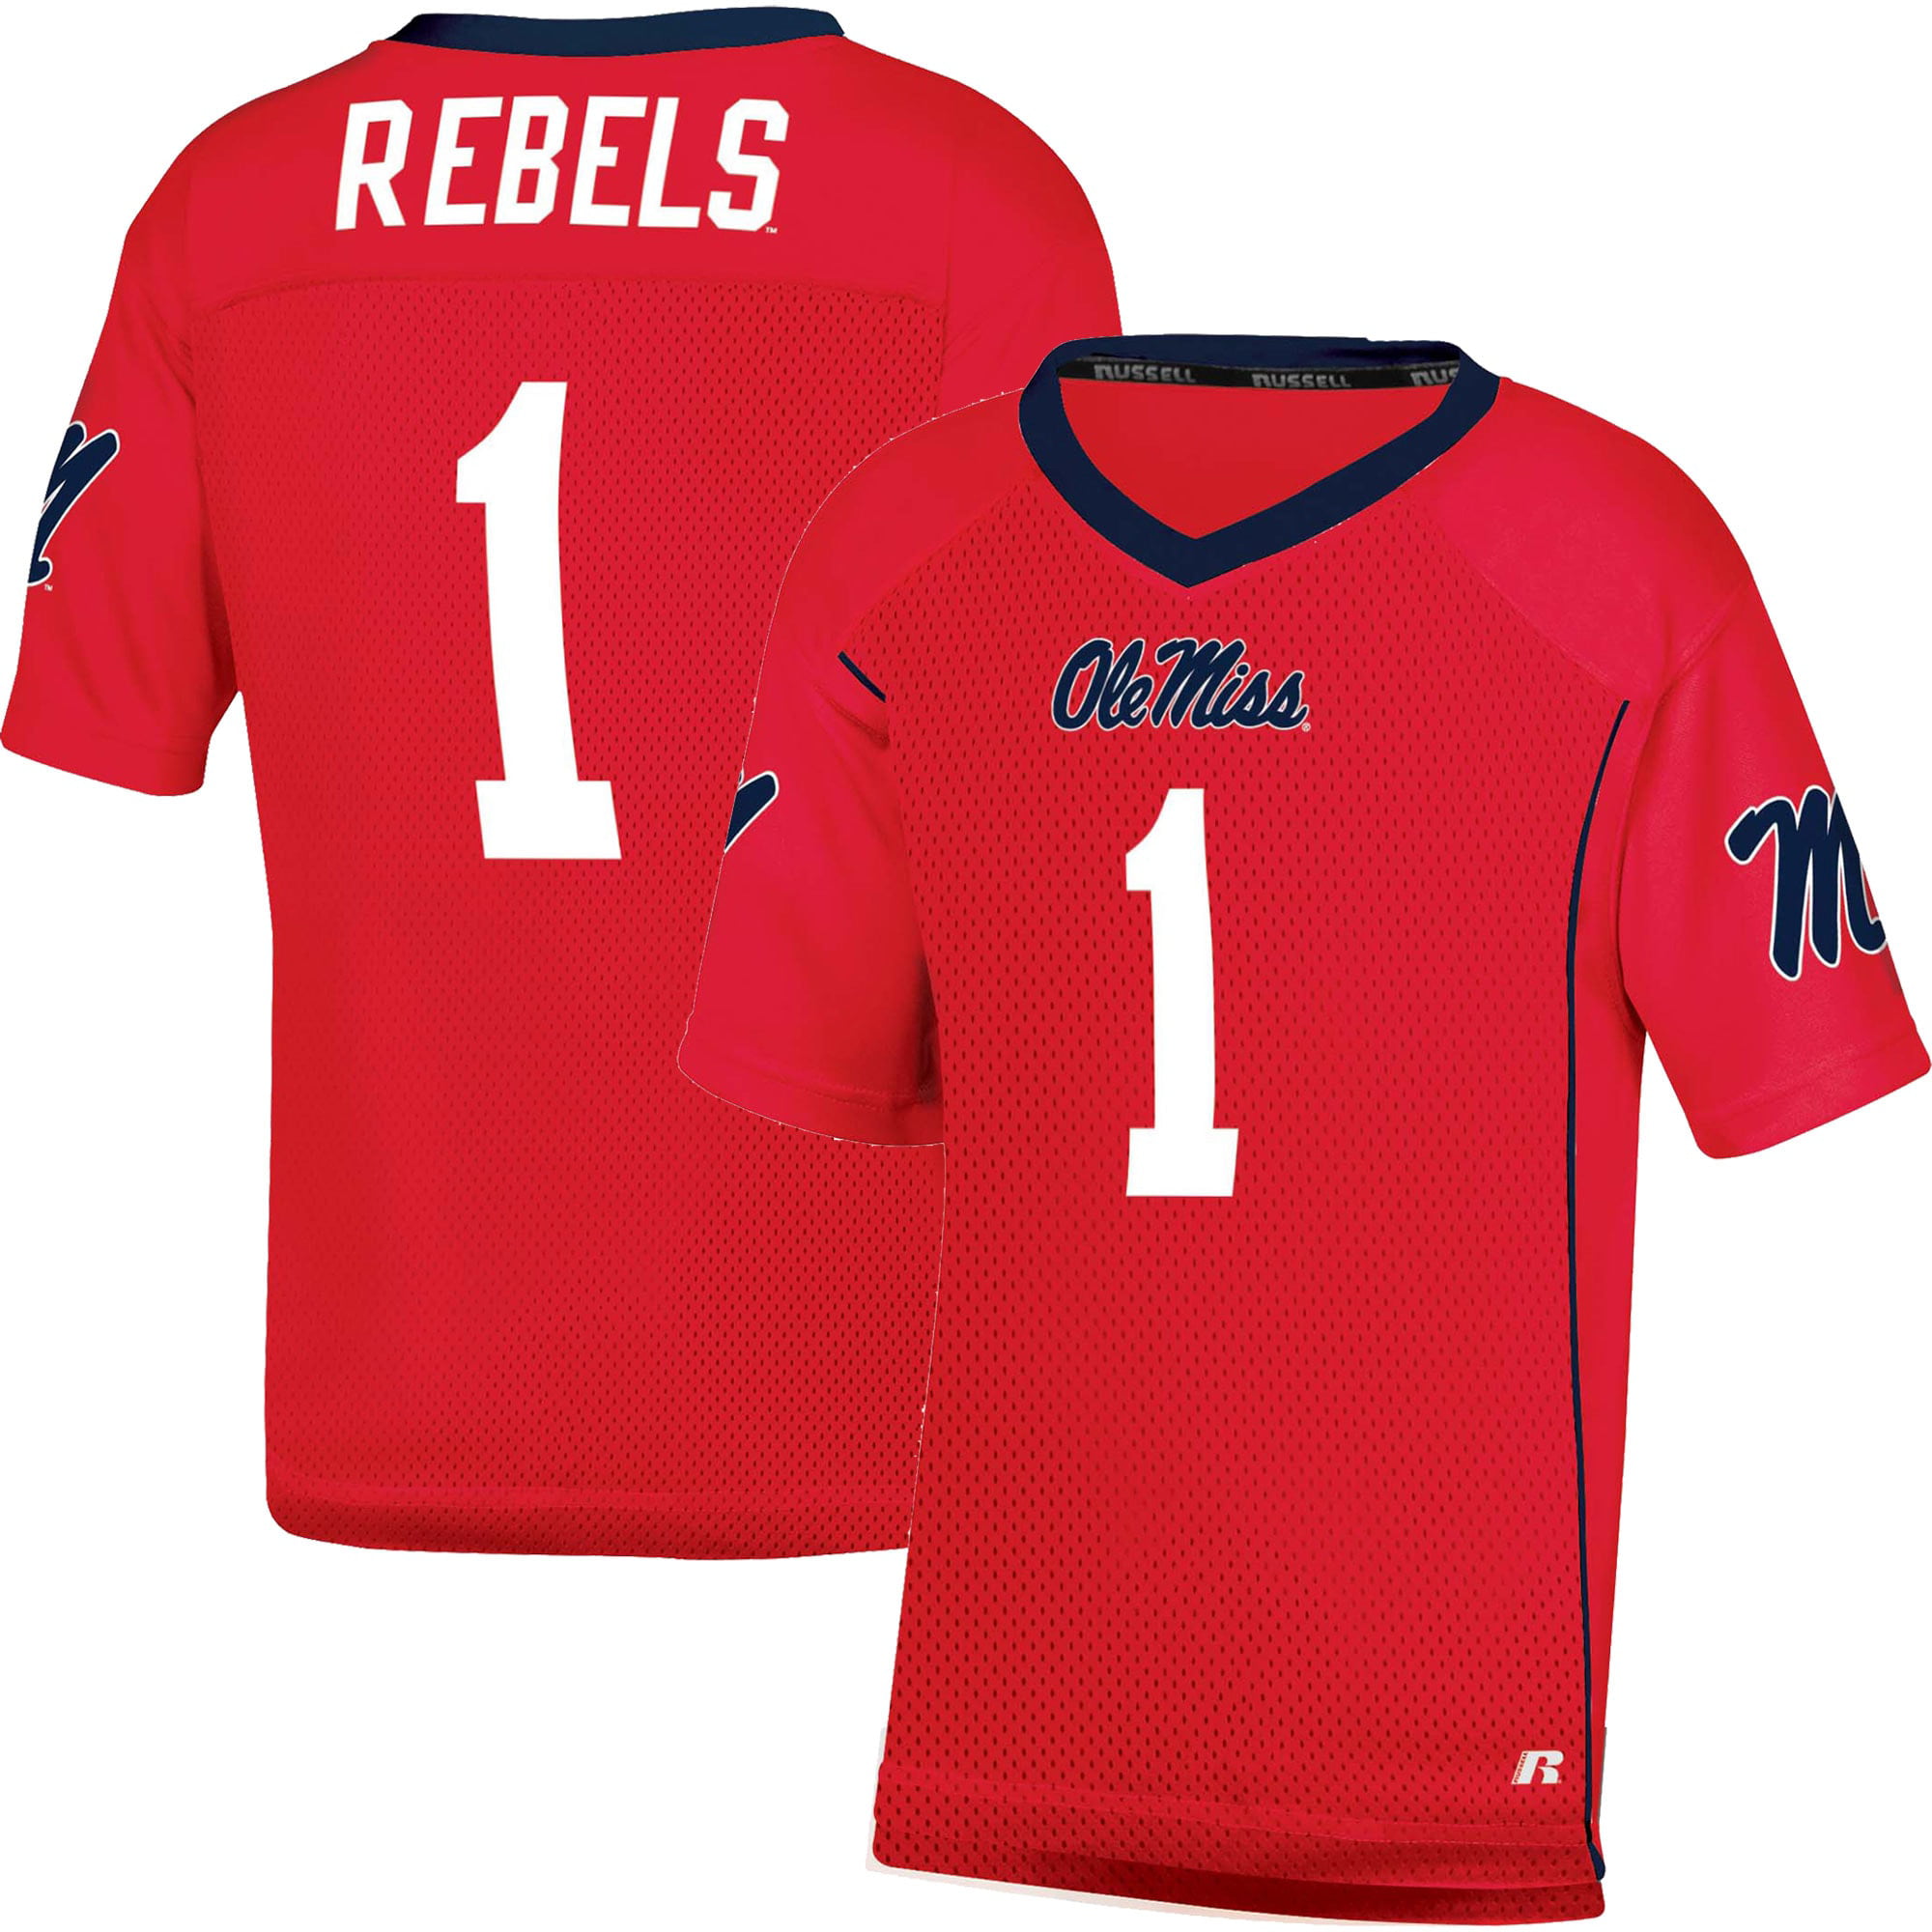 Youth Russell Athletic #1 Red Ole Miss Rebels Football Jersey - Walmart.com